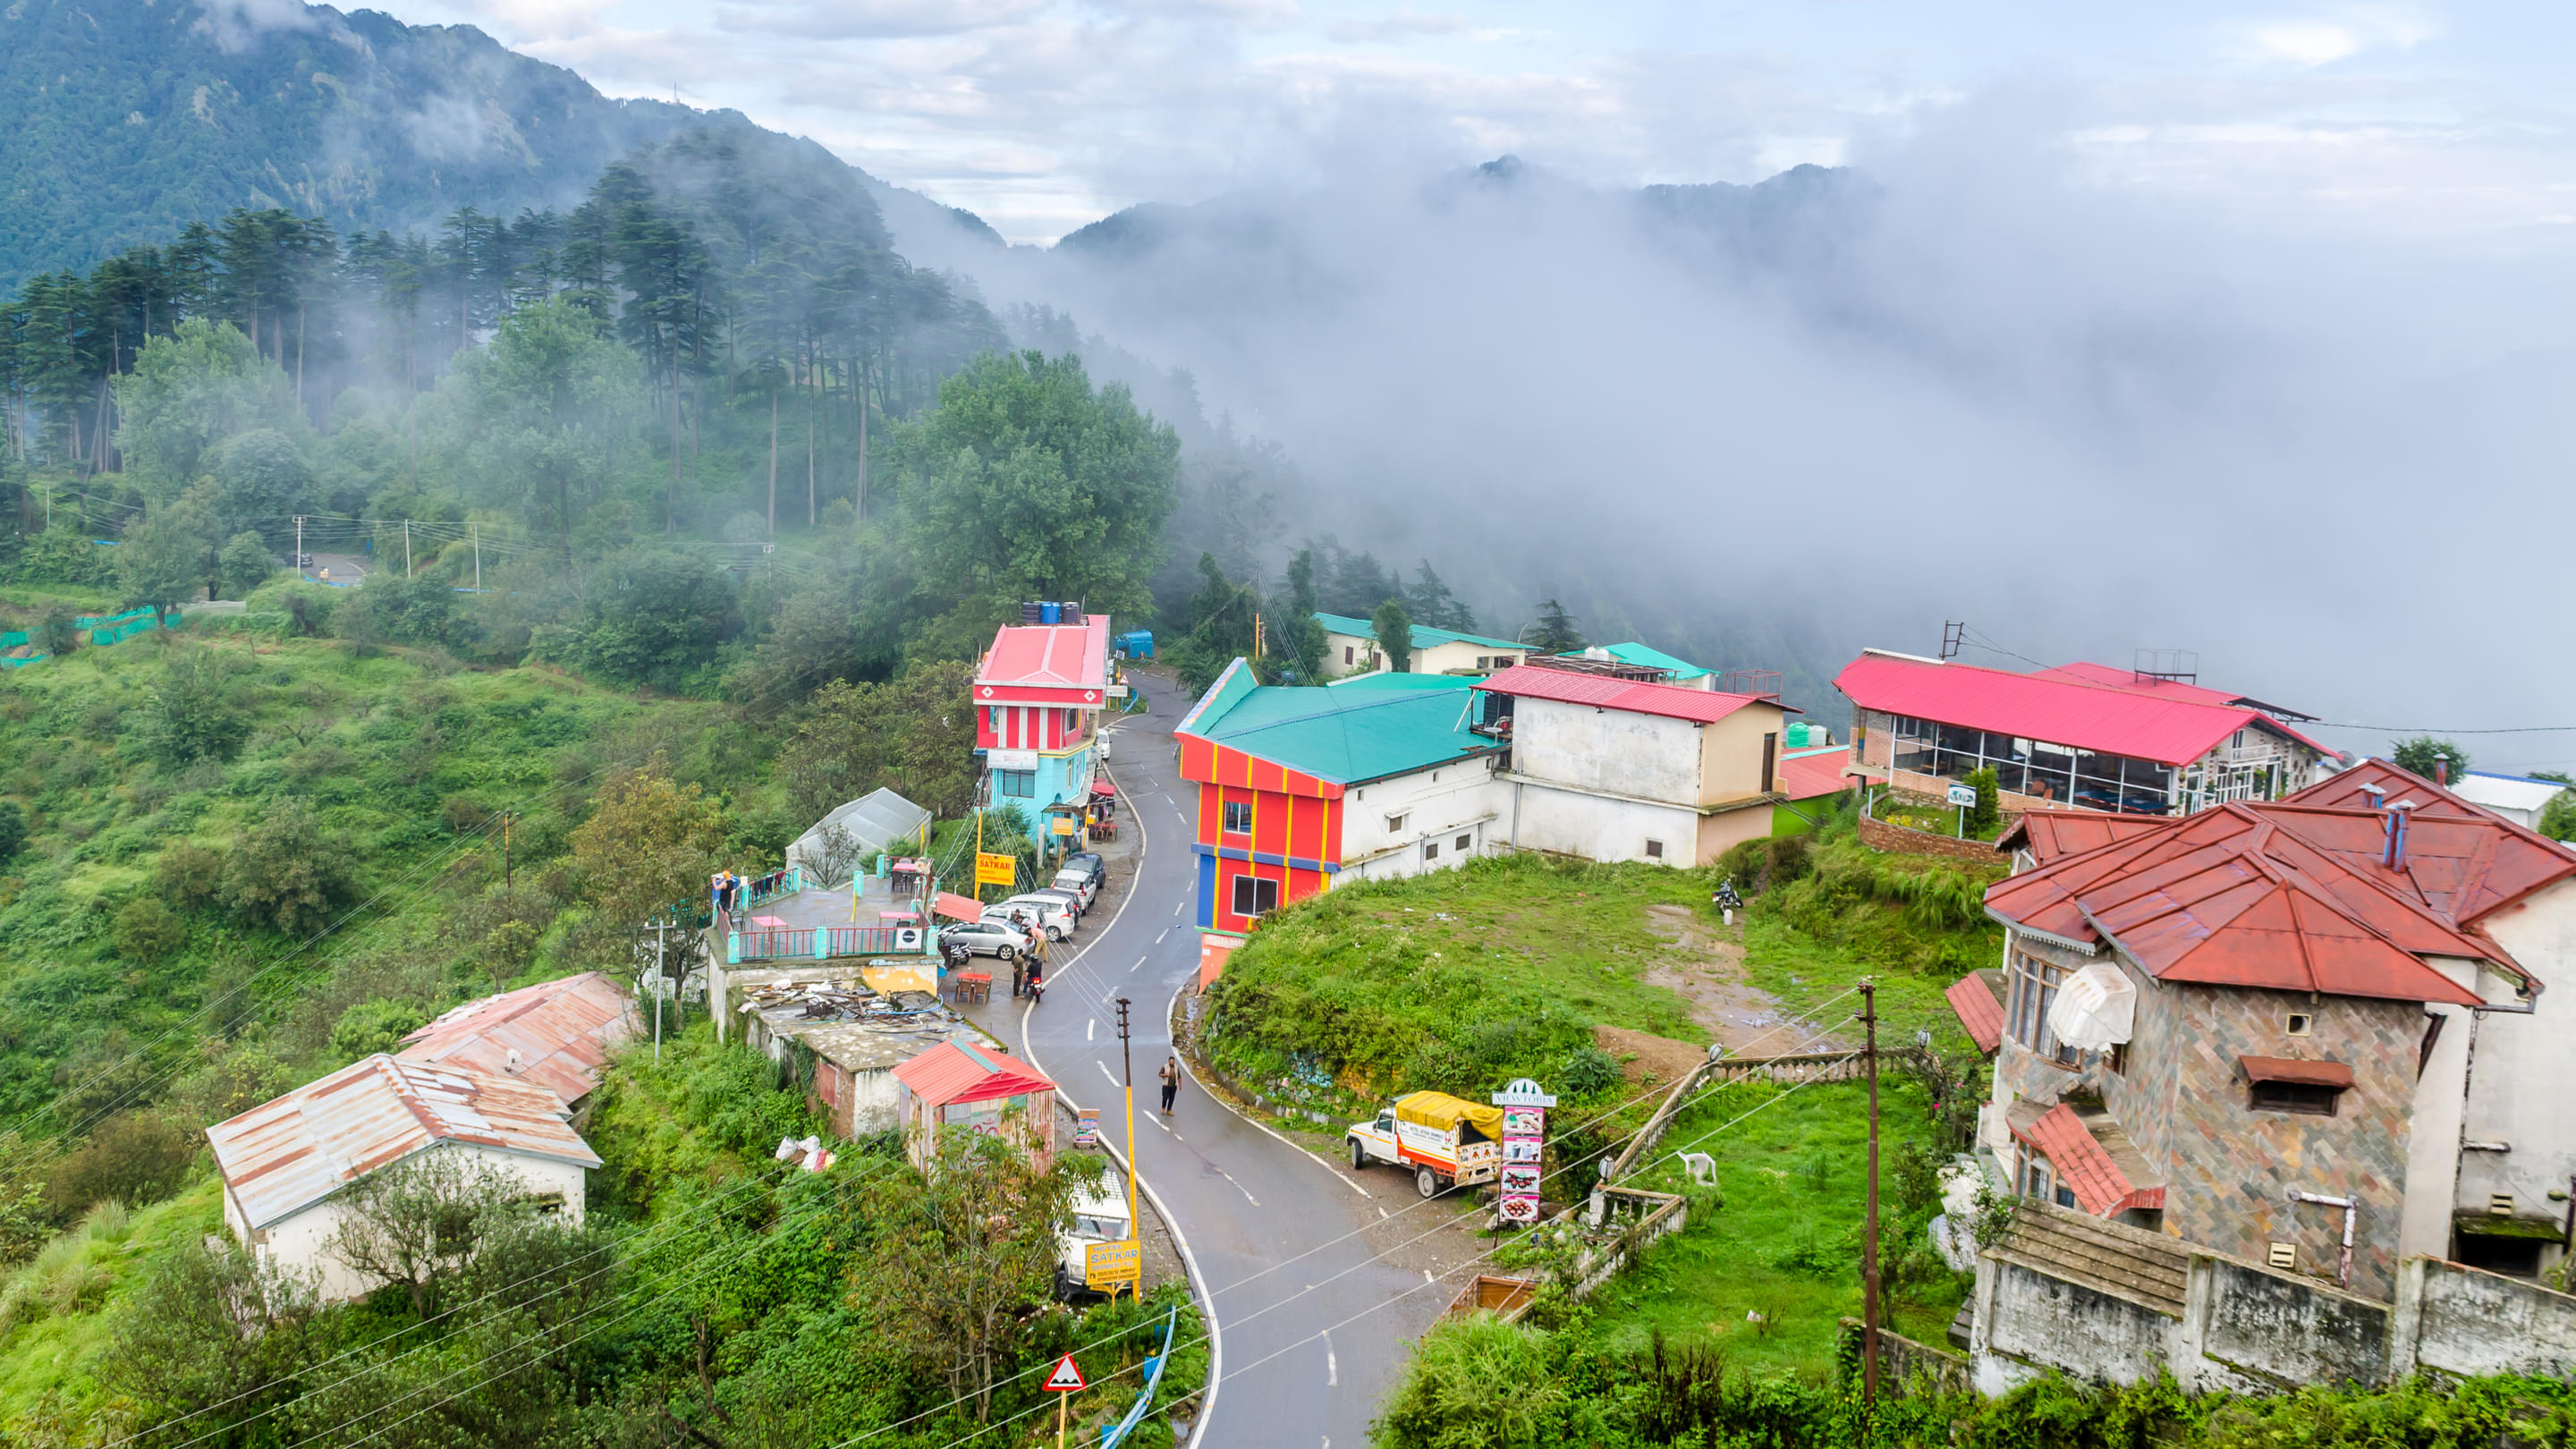 Dhanaulti Packages from Nashik | Get Upto 40% Off